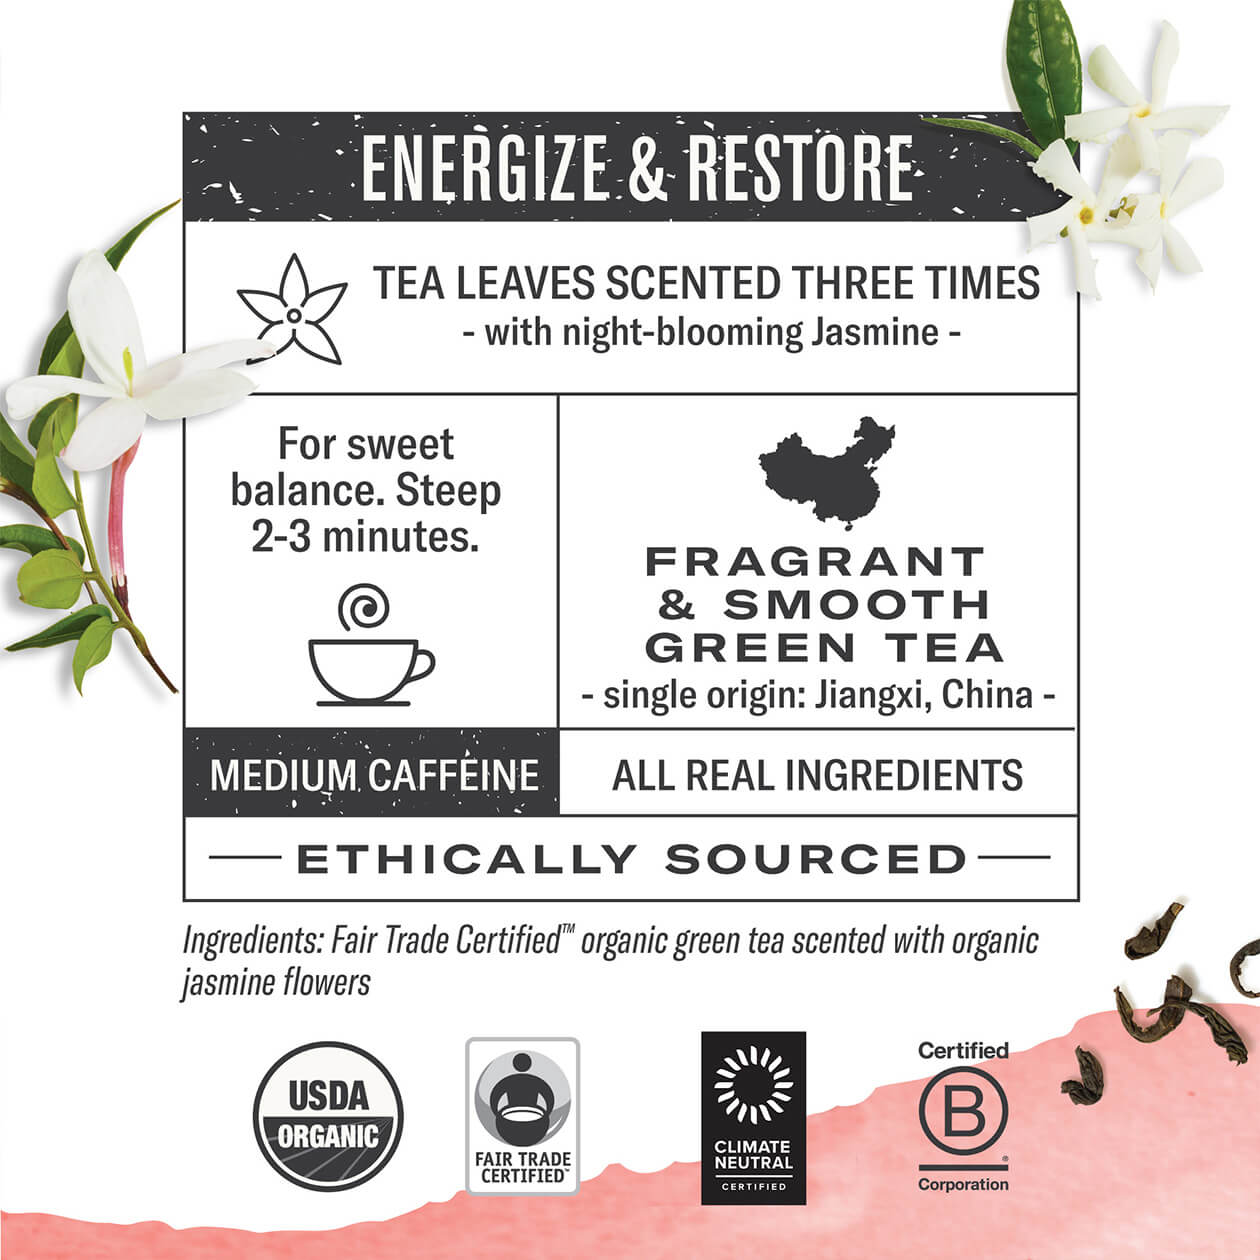 Infographic about Jasmine Green: steep 2-3 minutes, origin: Jiangxi China, medium caffeine, all real ingredients, ethically sourced